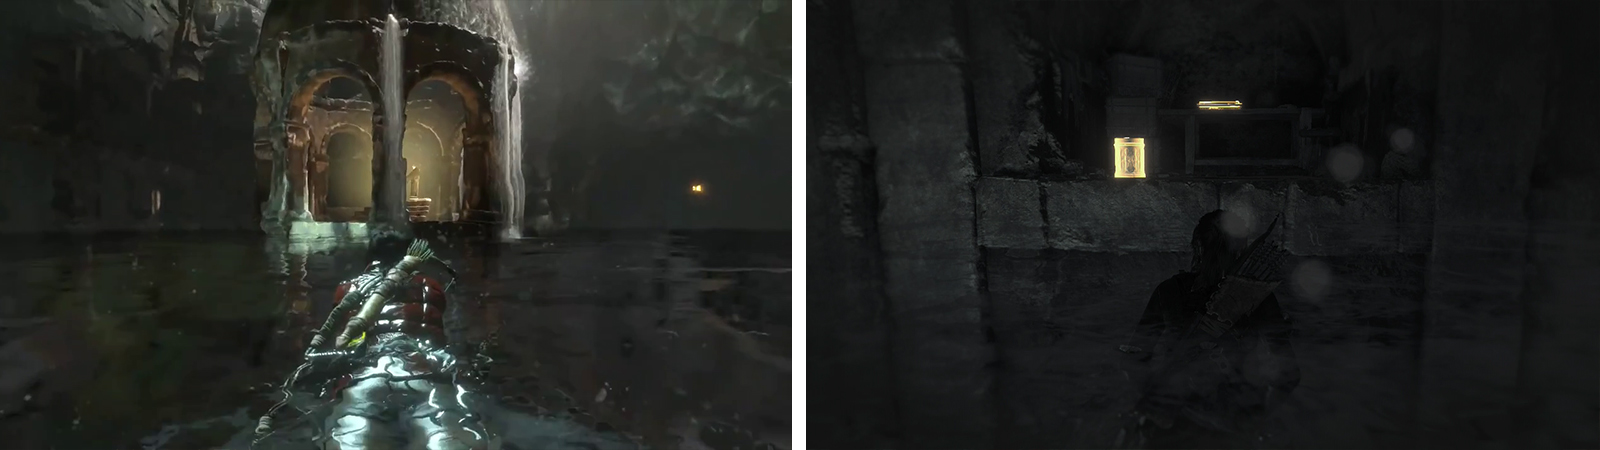 Once the water is at the highest level you can reach the Codex (left). Before leaving, check the alcoves to the left to find Document 09 (right).